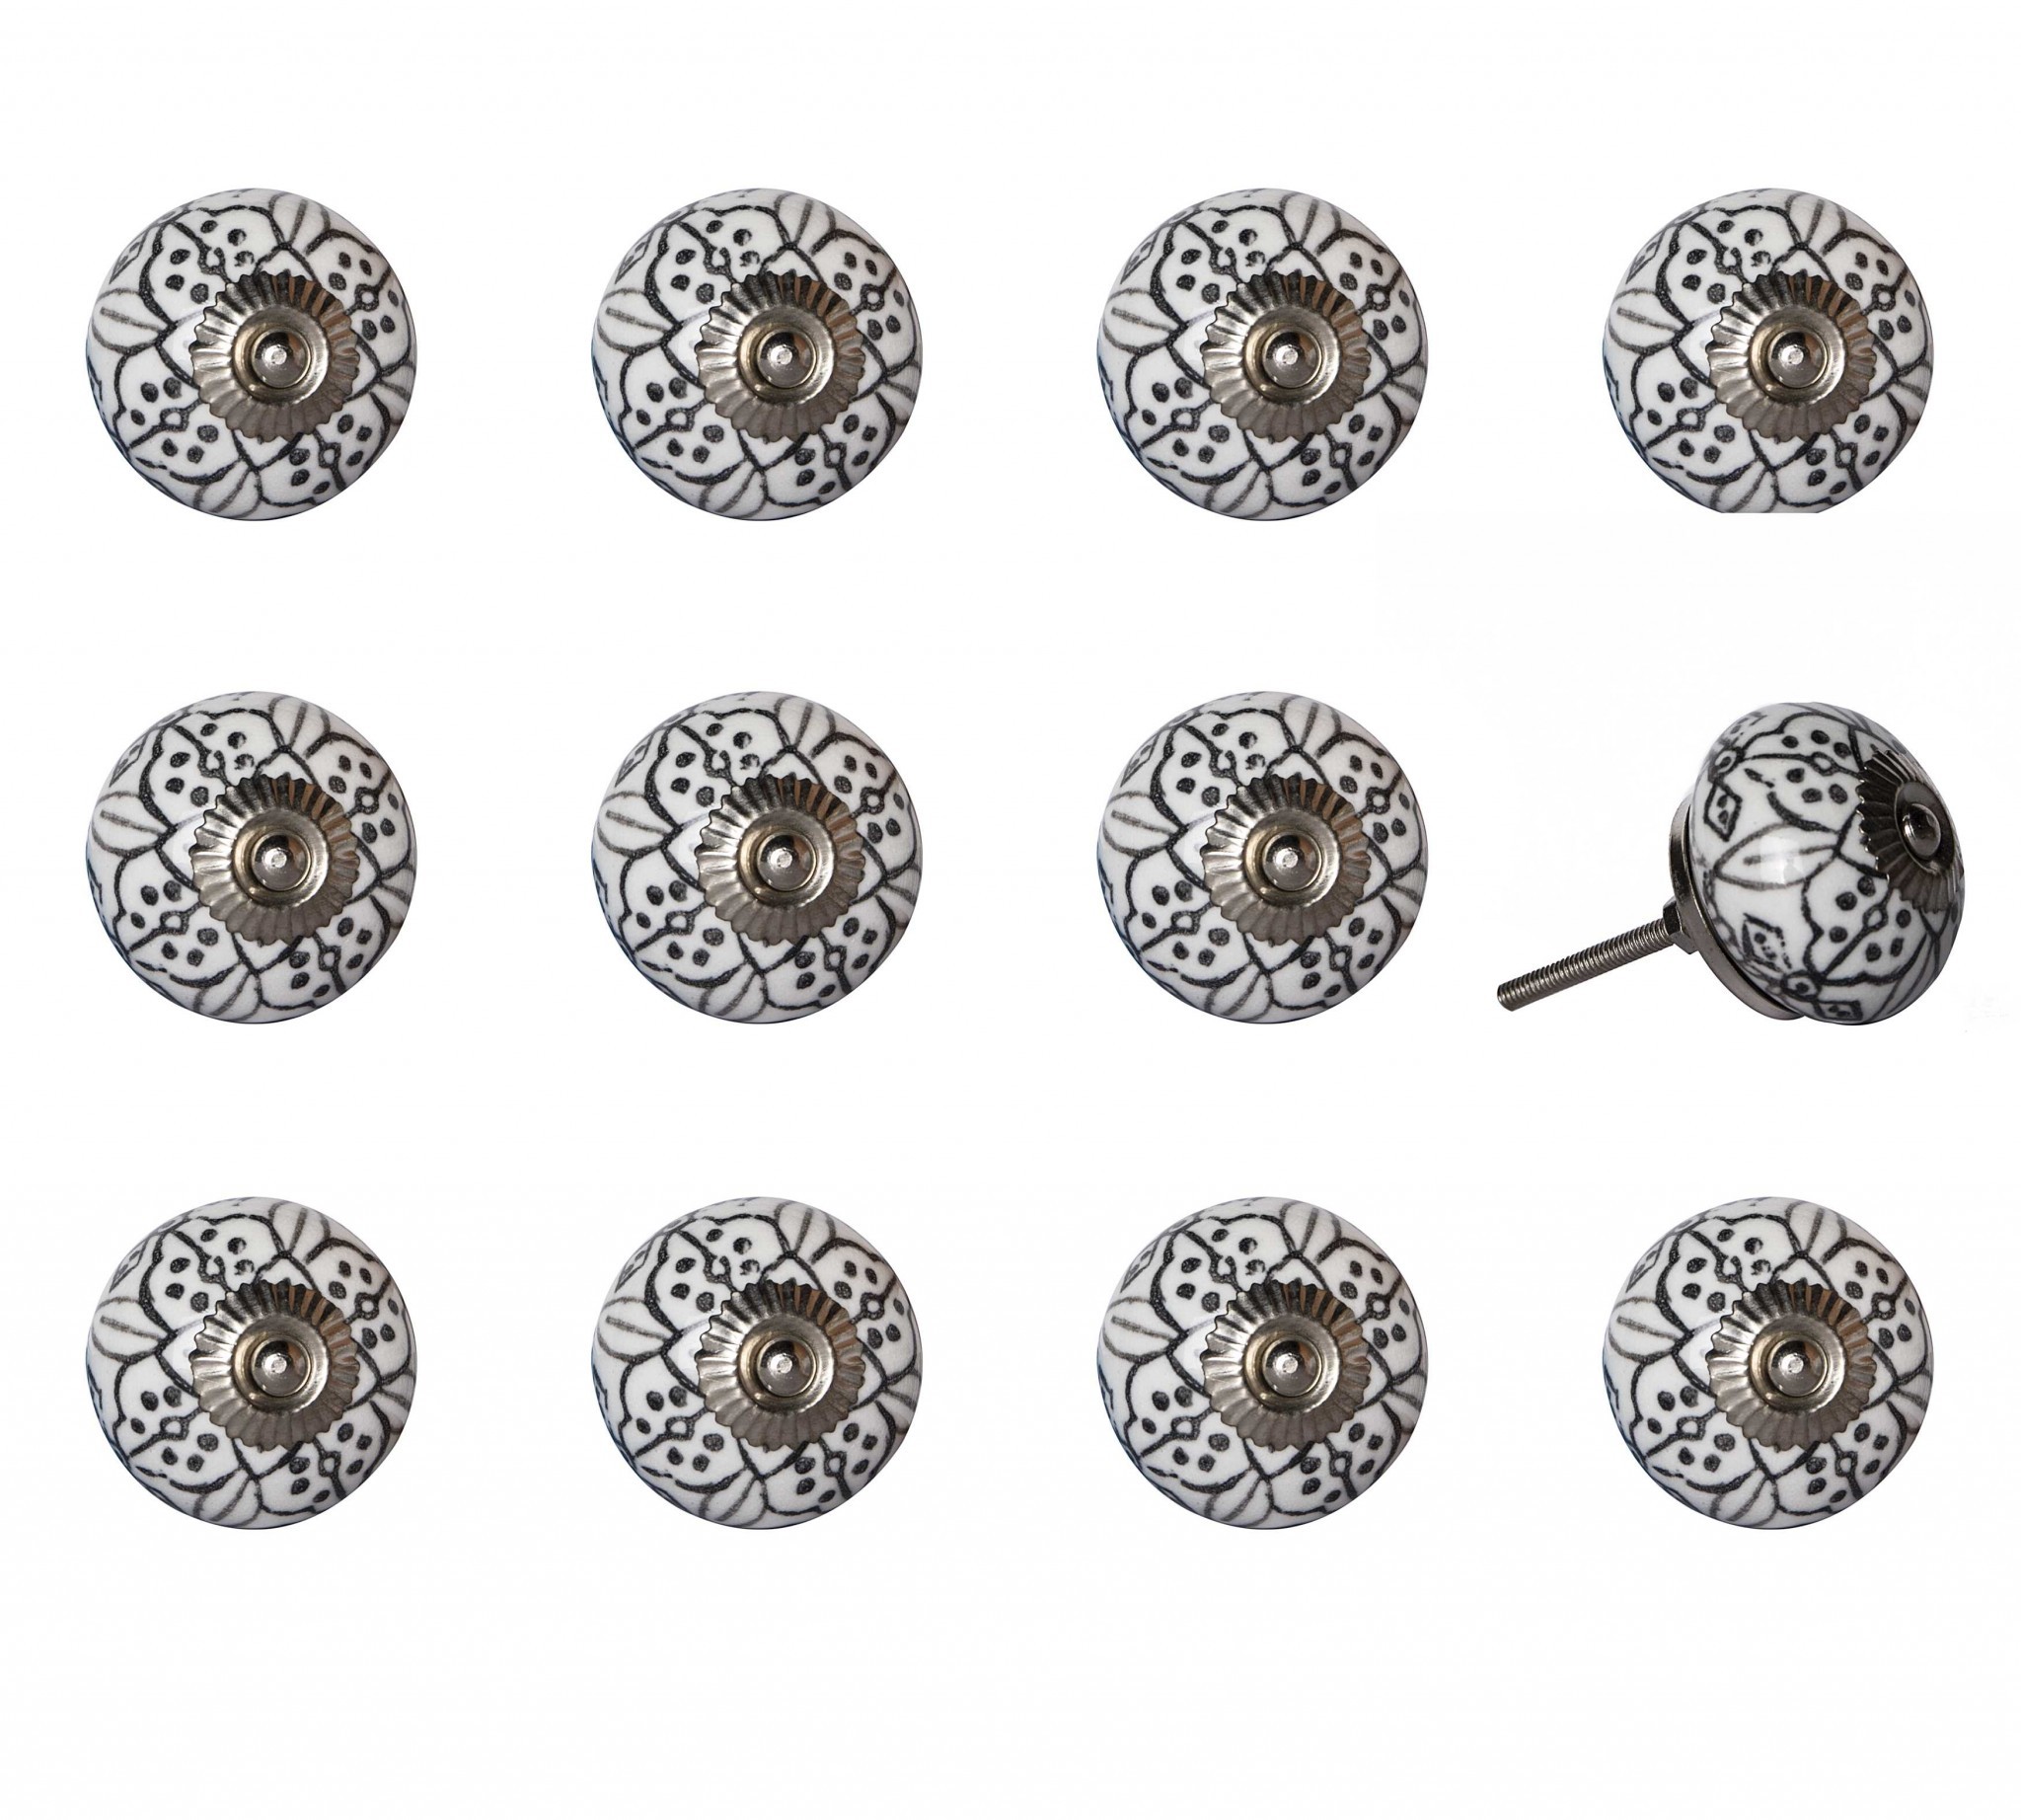 1.5" x 1.5" x 1.5" Black, Gray and Silver - Knobs 12-Pack